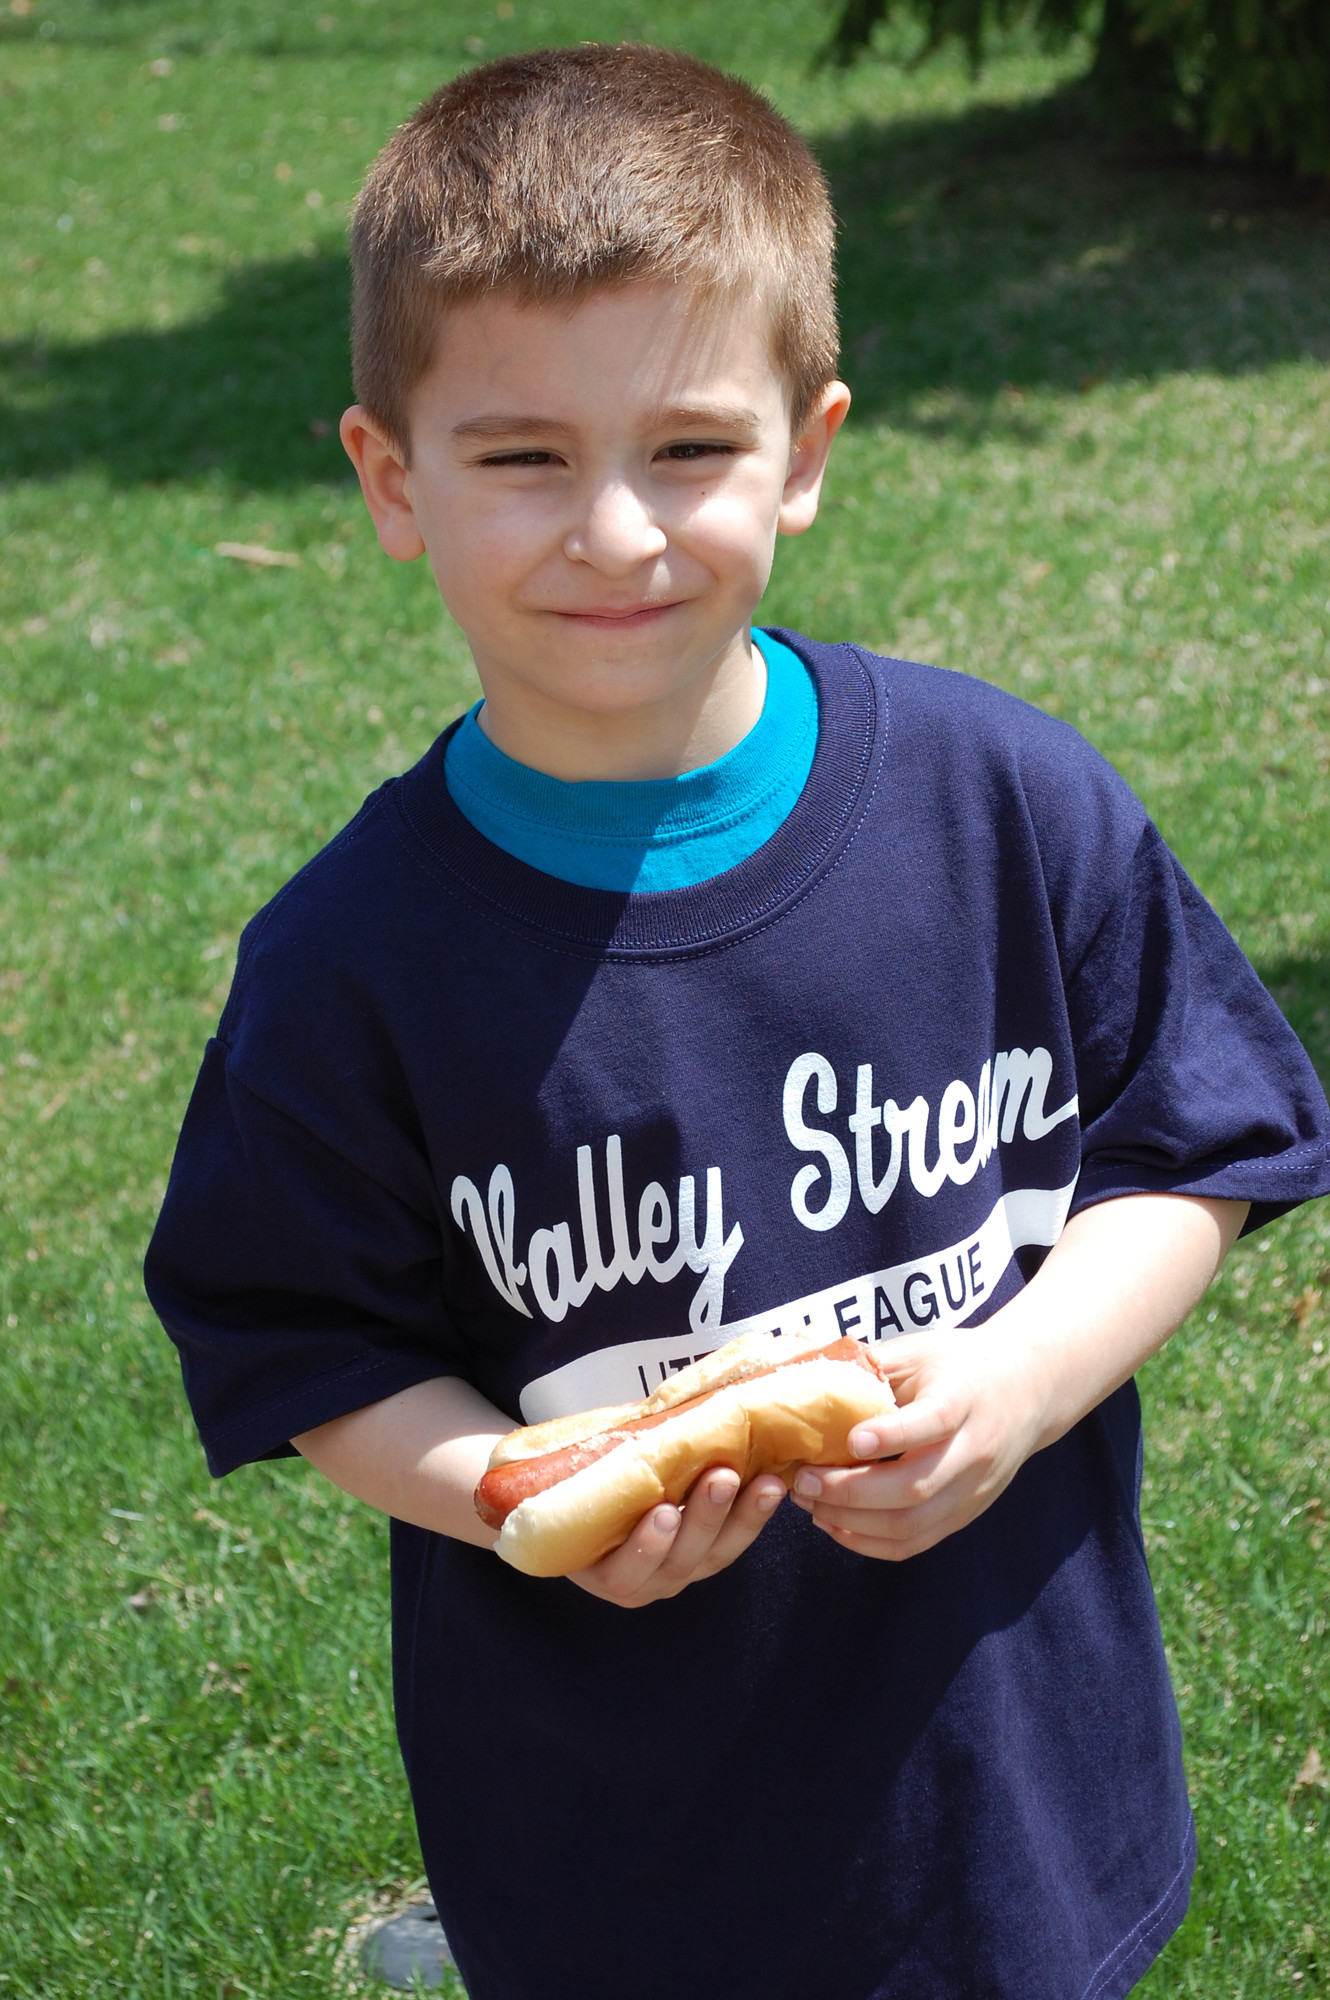 Nicholas Galanis, 5, playing in the league for first time, enjoyed a hot dog after the ceremony.